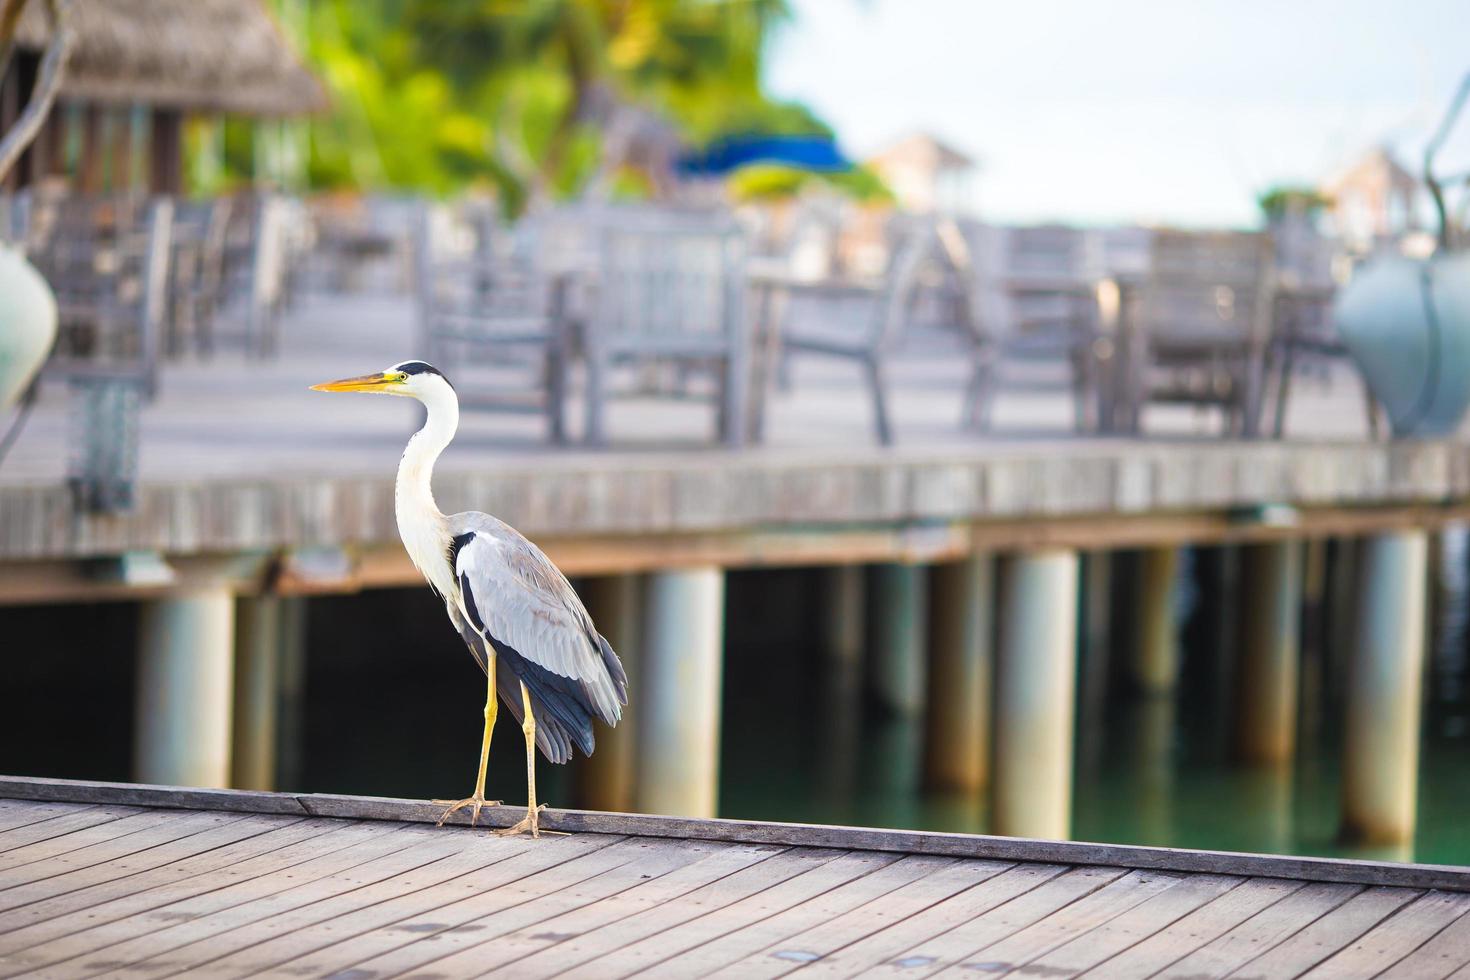 Maldives, South Asia, 2020 - Grey heron standing on a dock photo